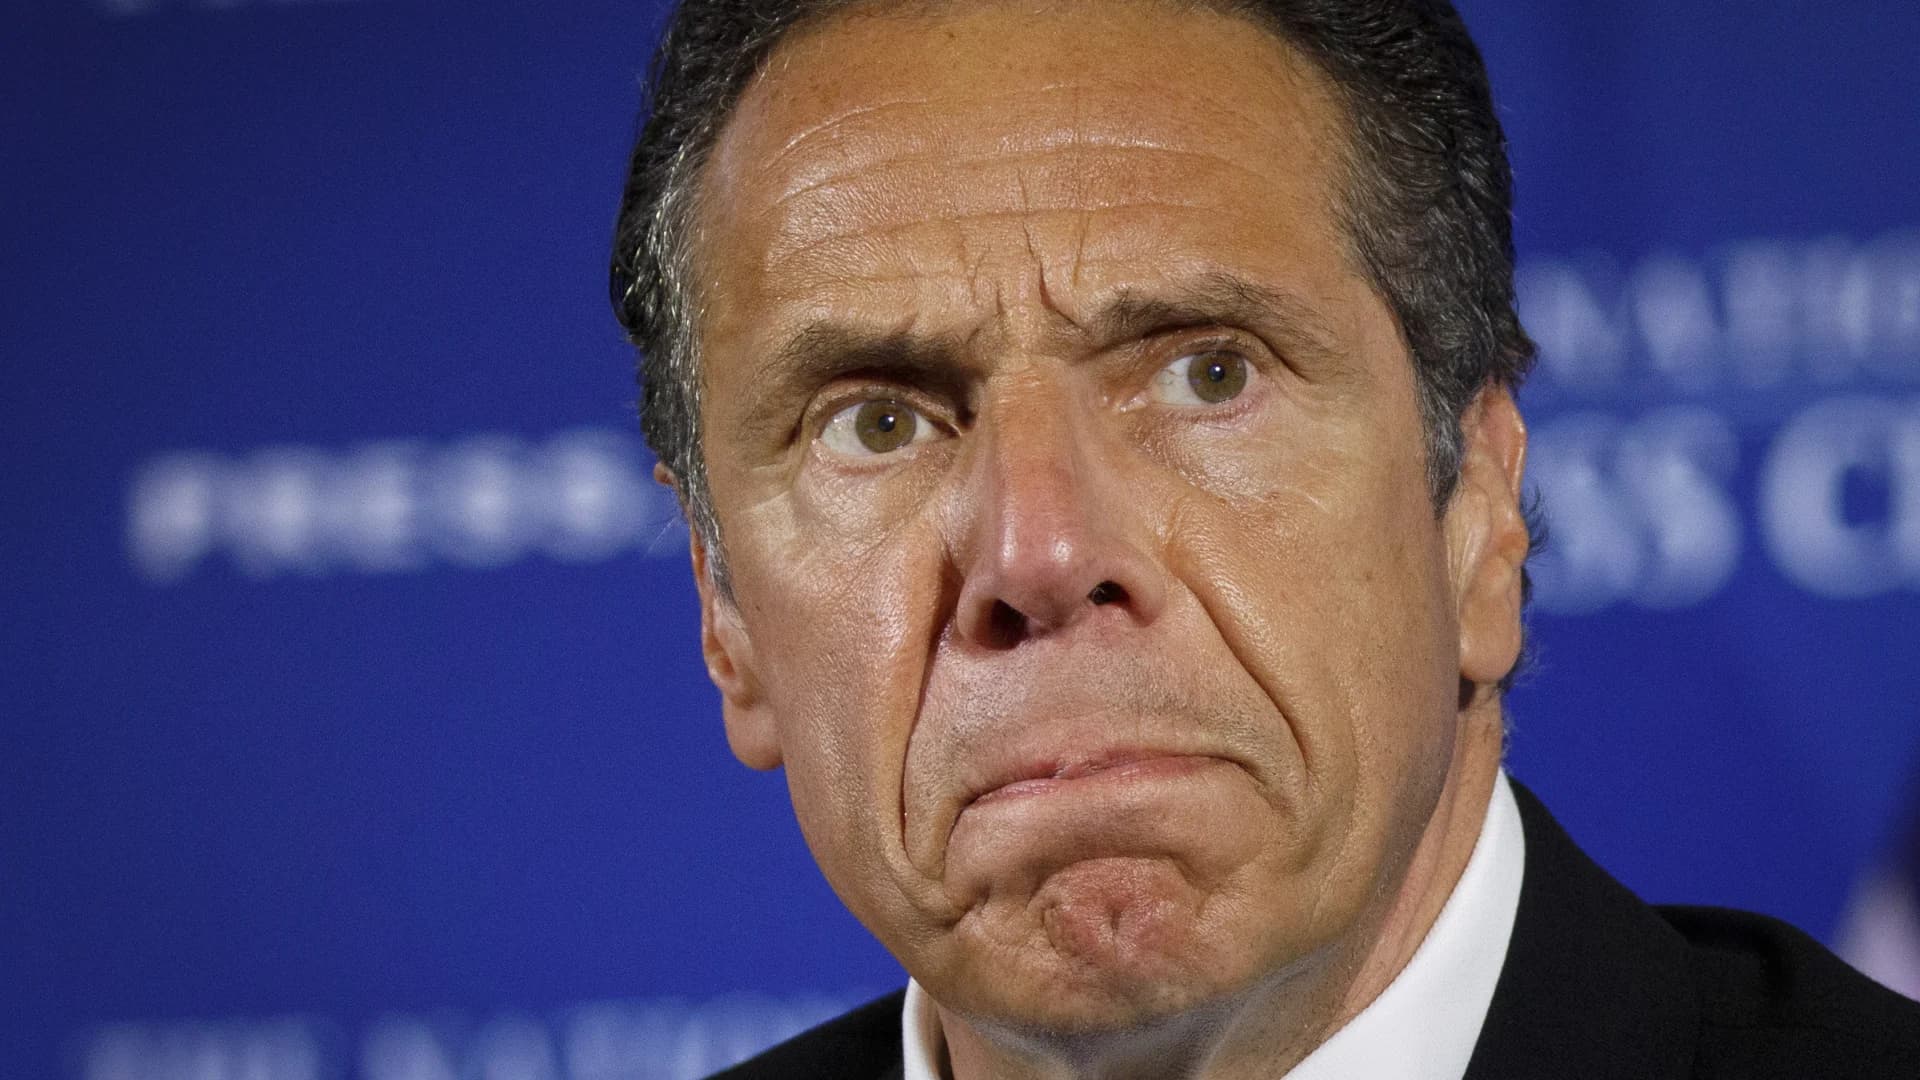 US started inquiry into Cuomo sexual harassment claims